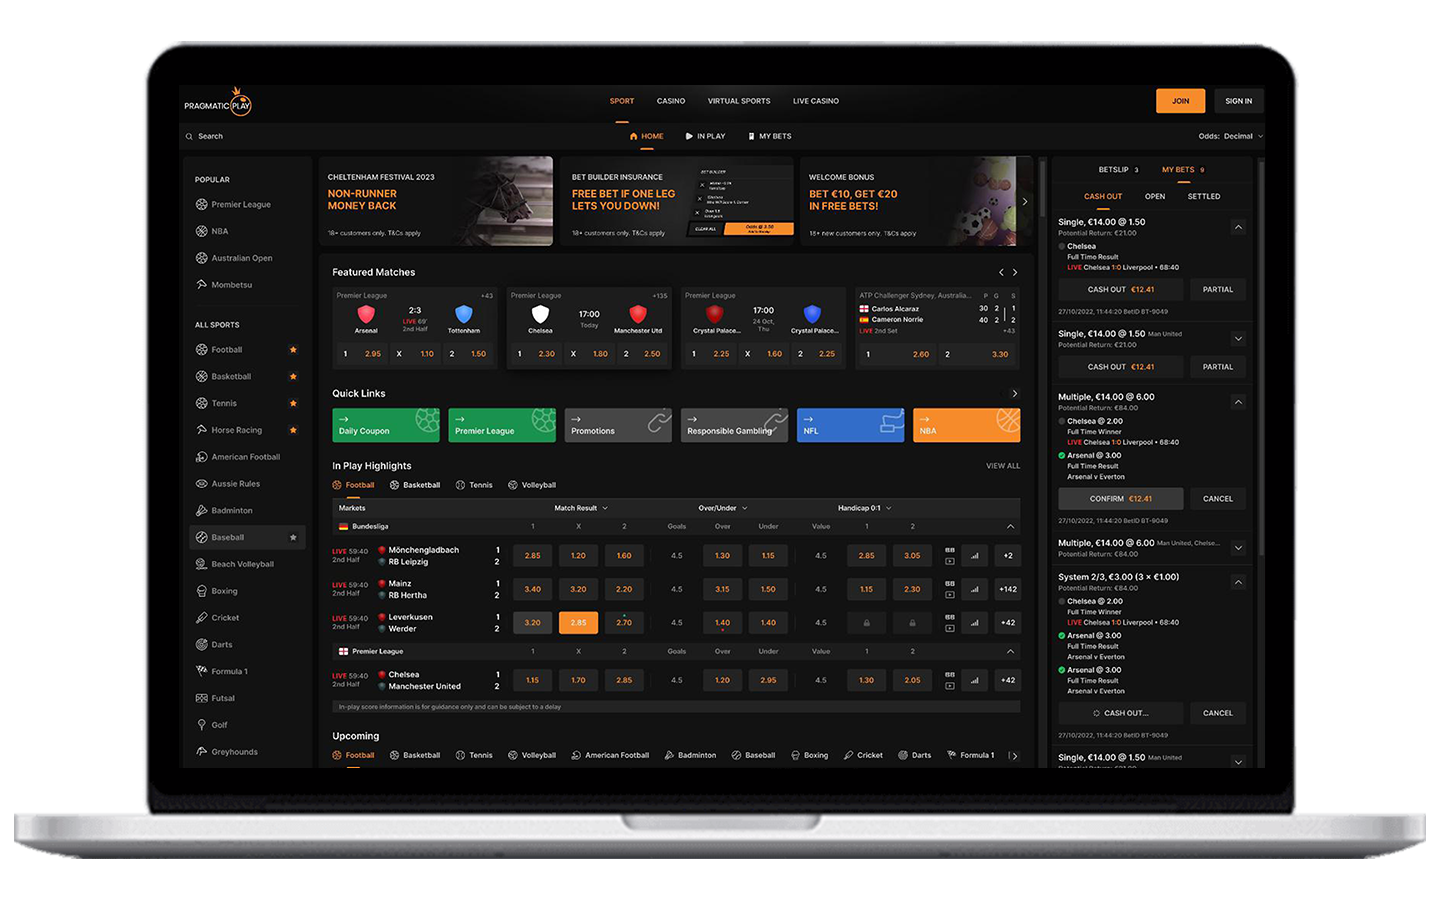 Sportsbook is our newest product vertical